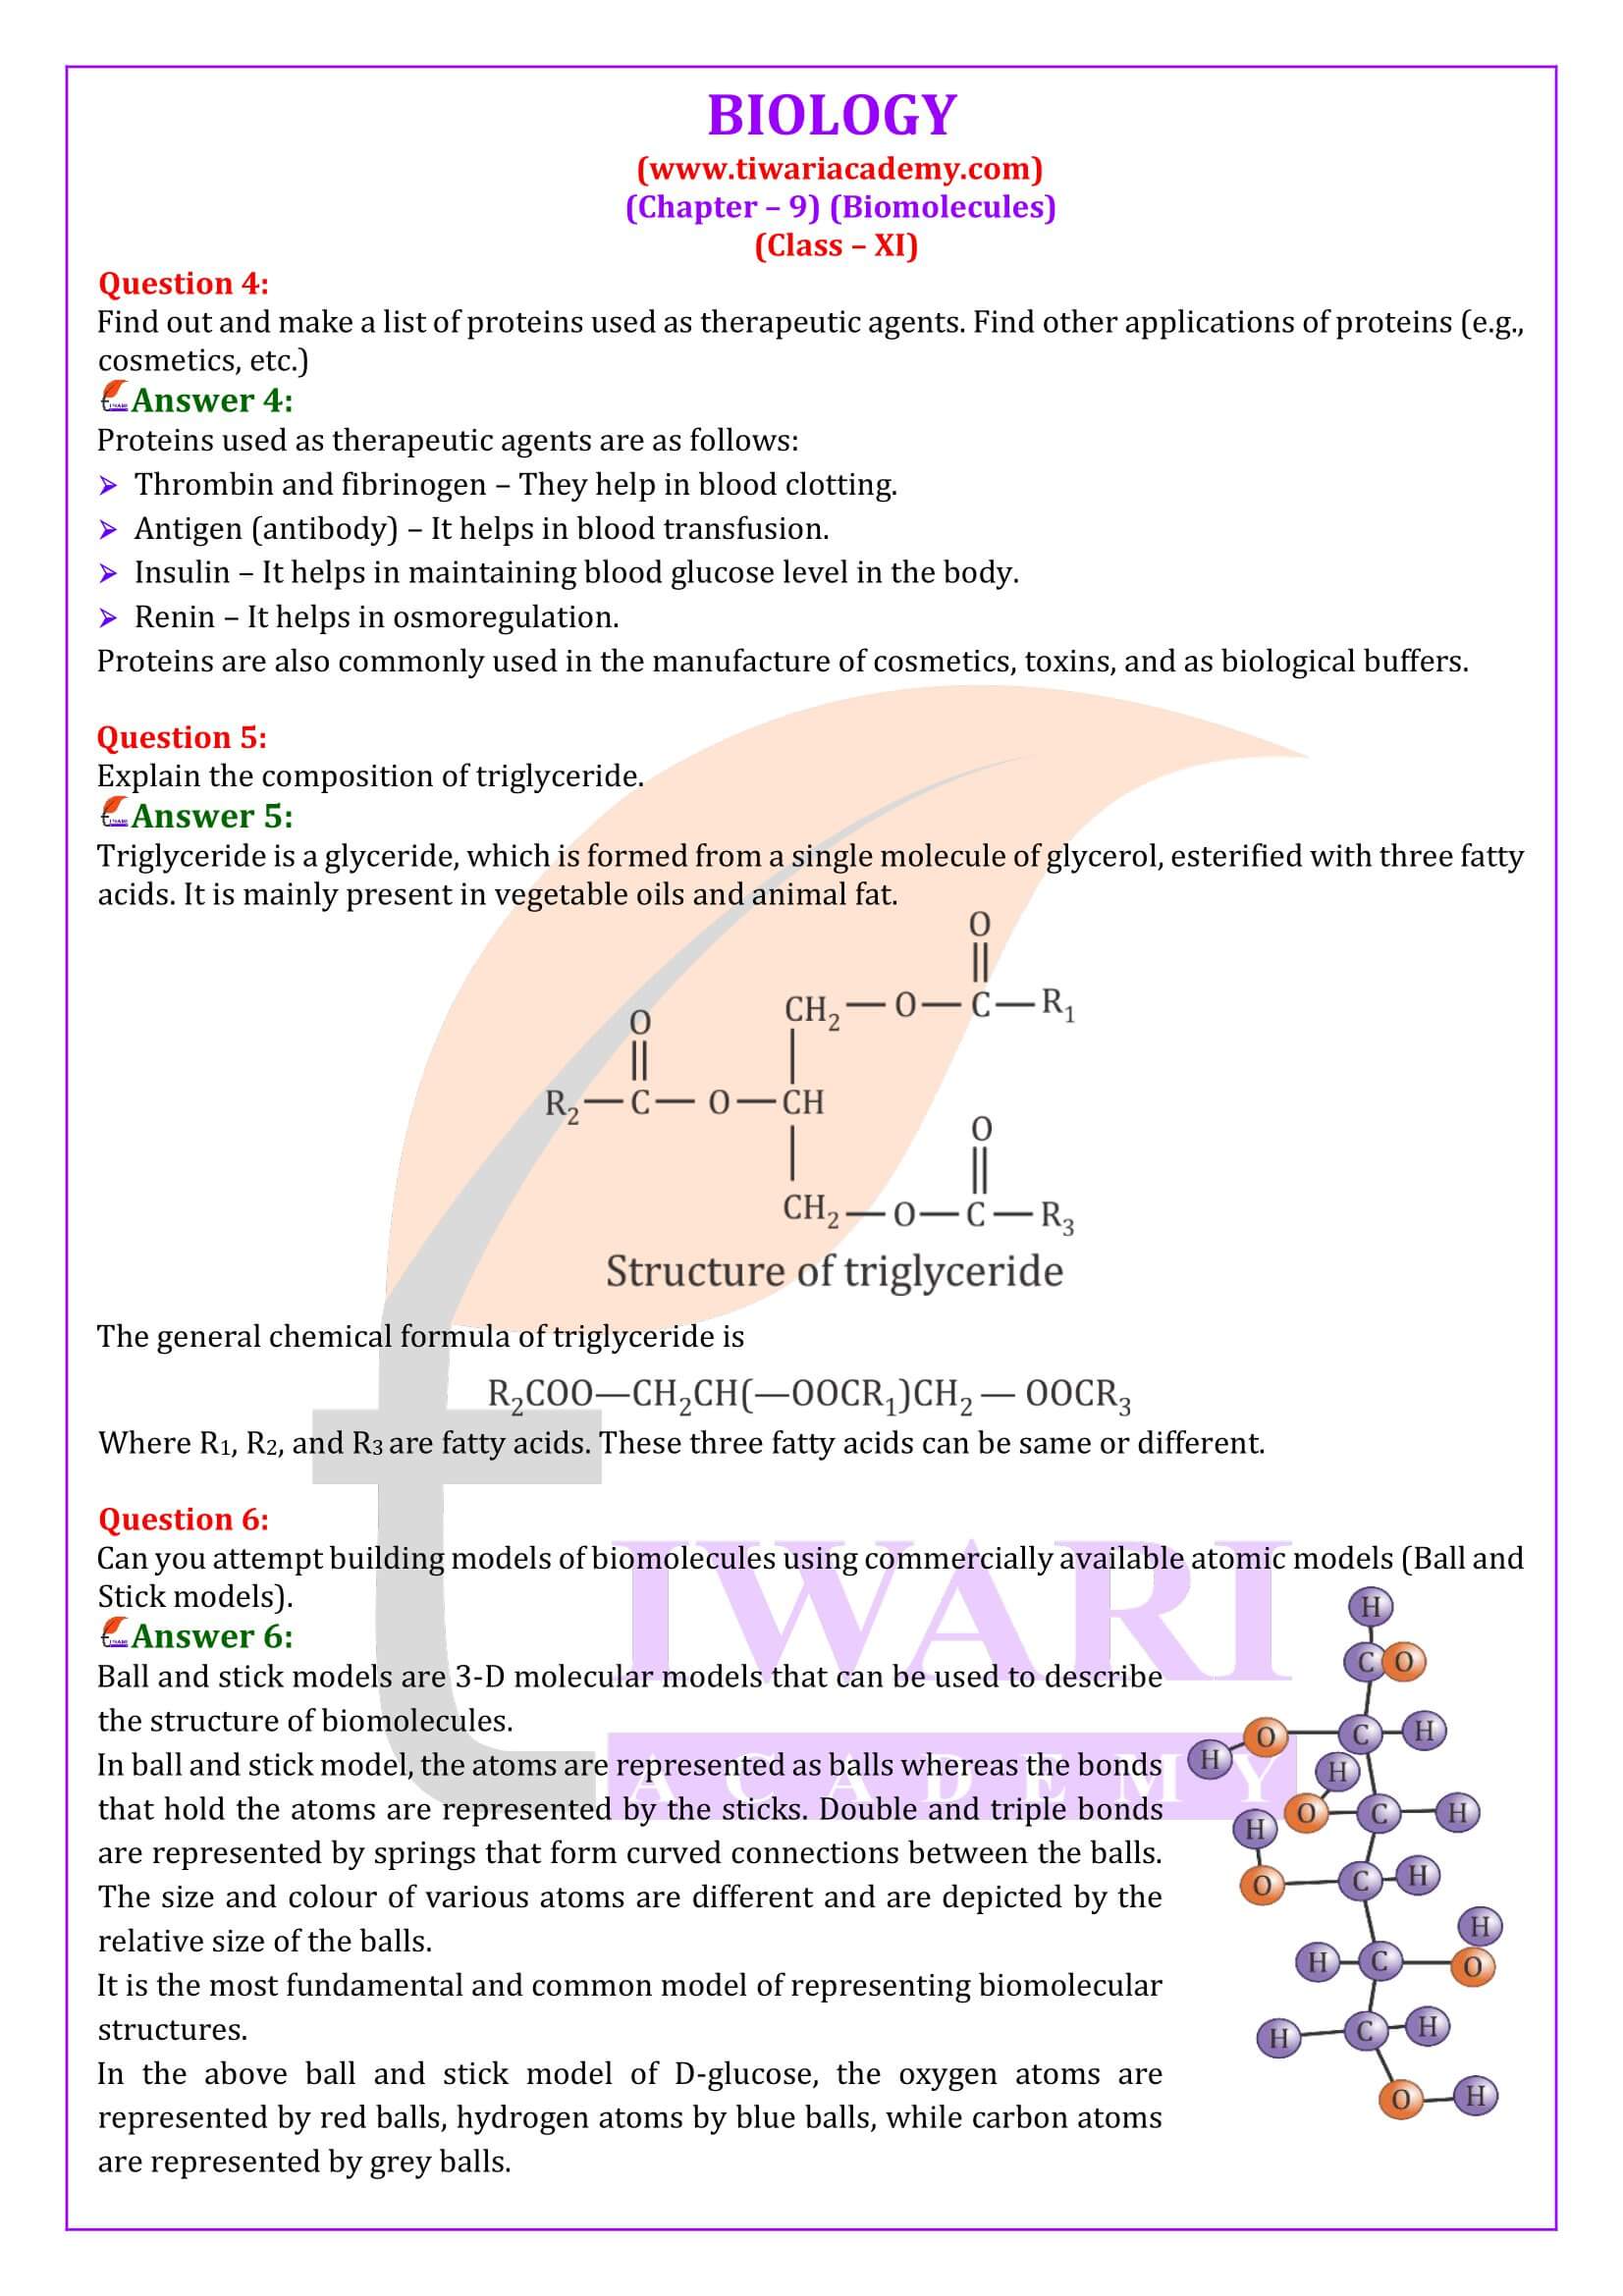 Class 11 Biology Chapter 9 Question Answers